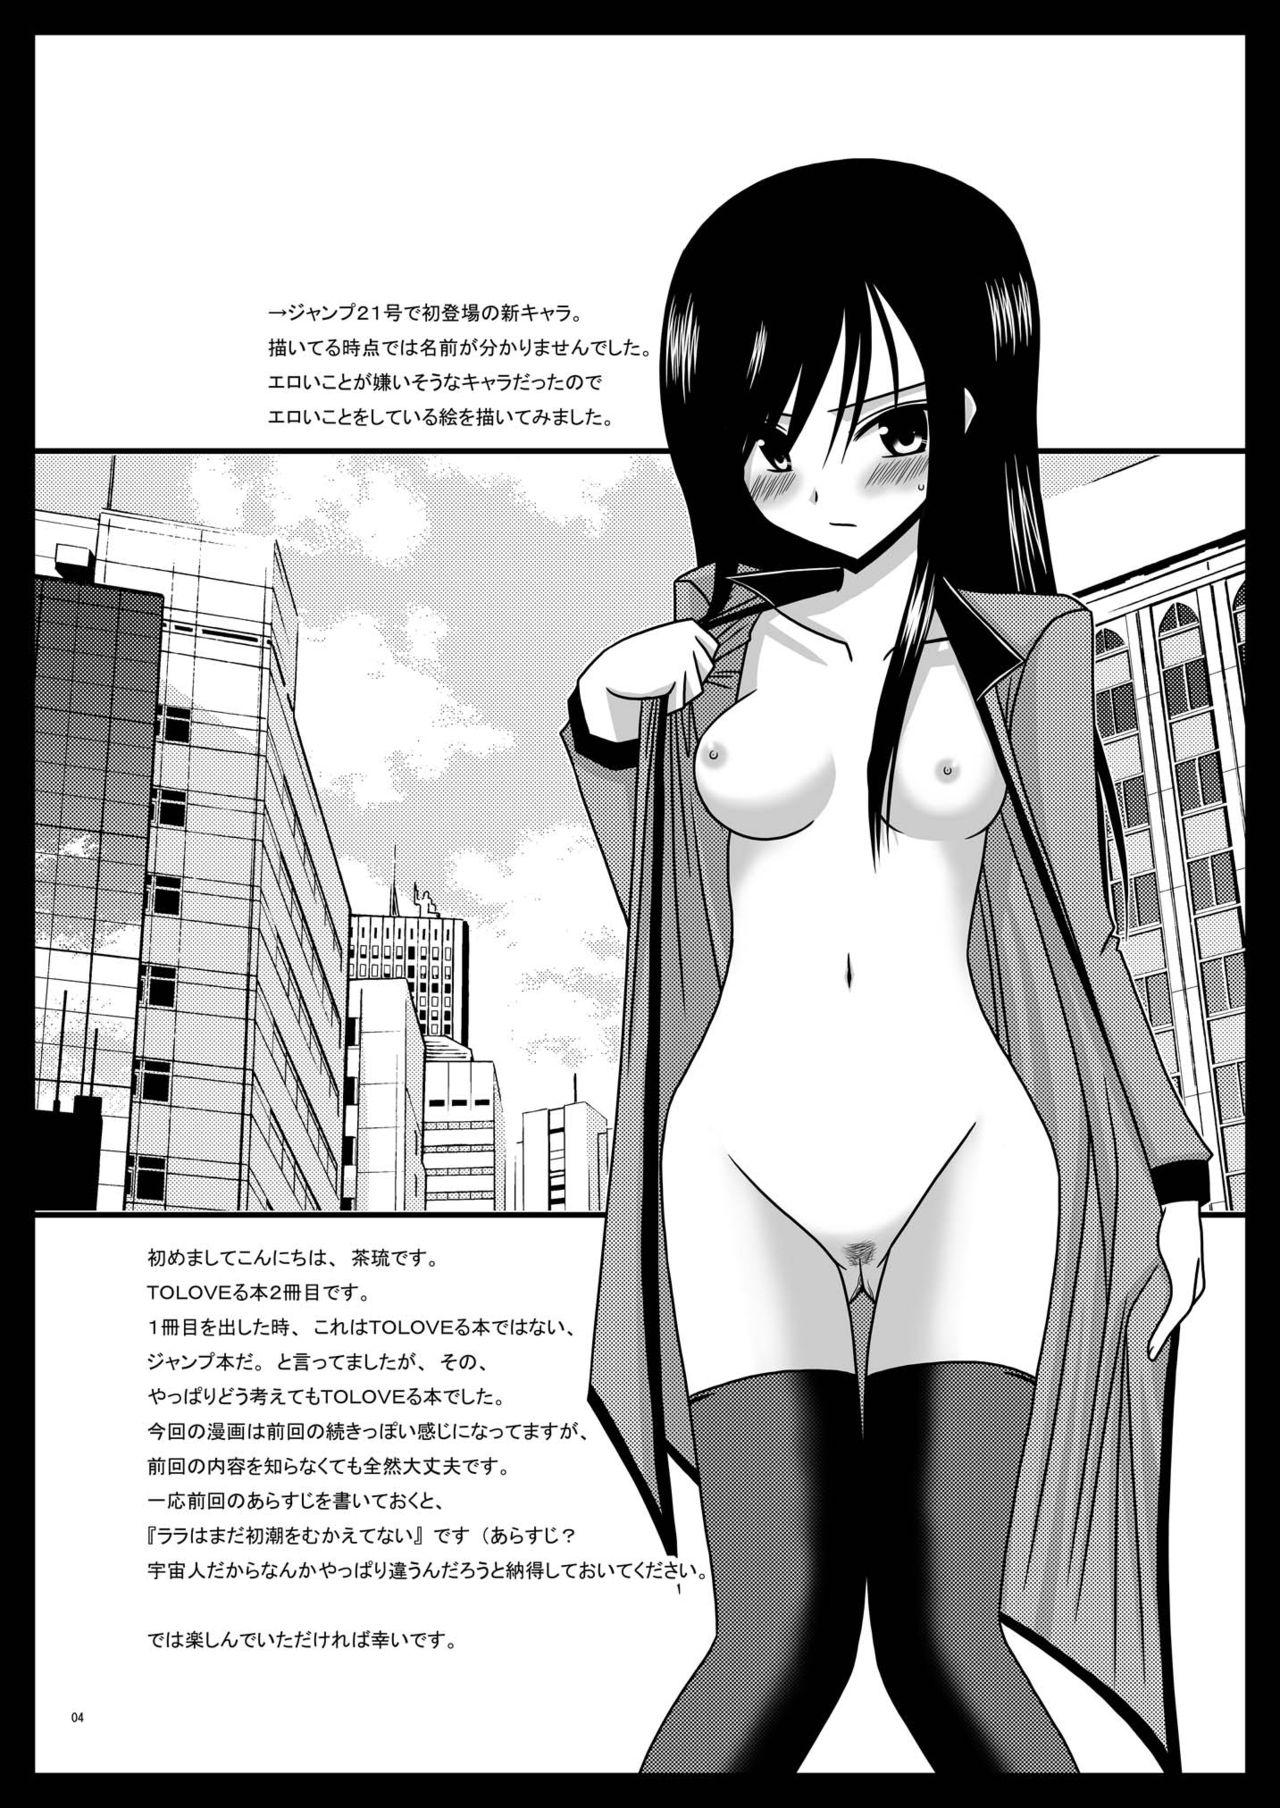 Creampies Over the Trouble!! II - To love-ru Masseur - Page 4